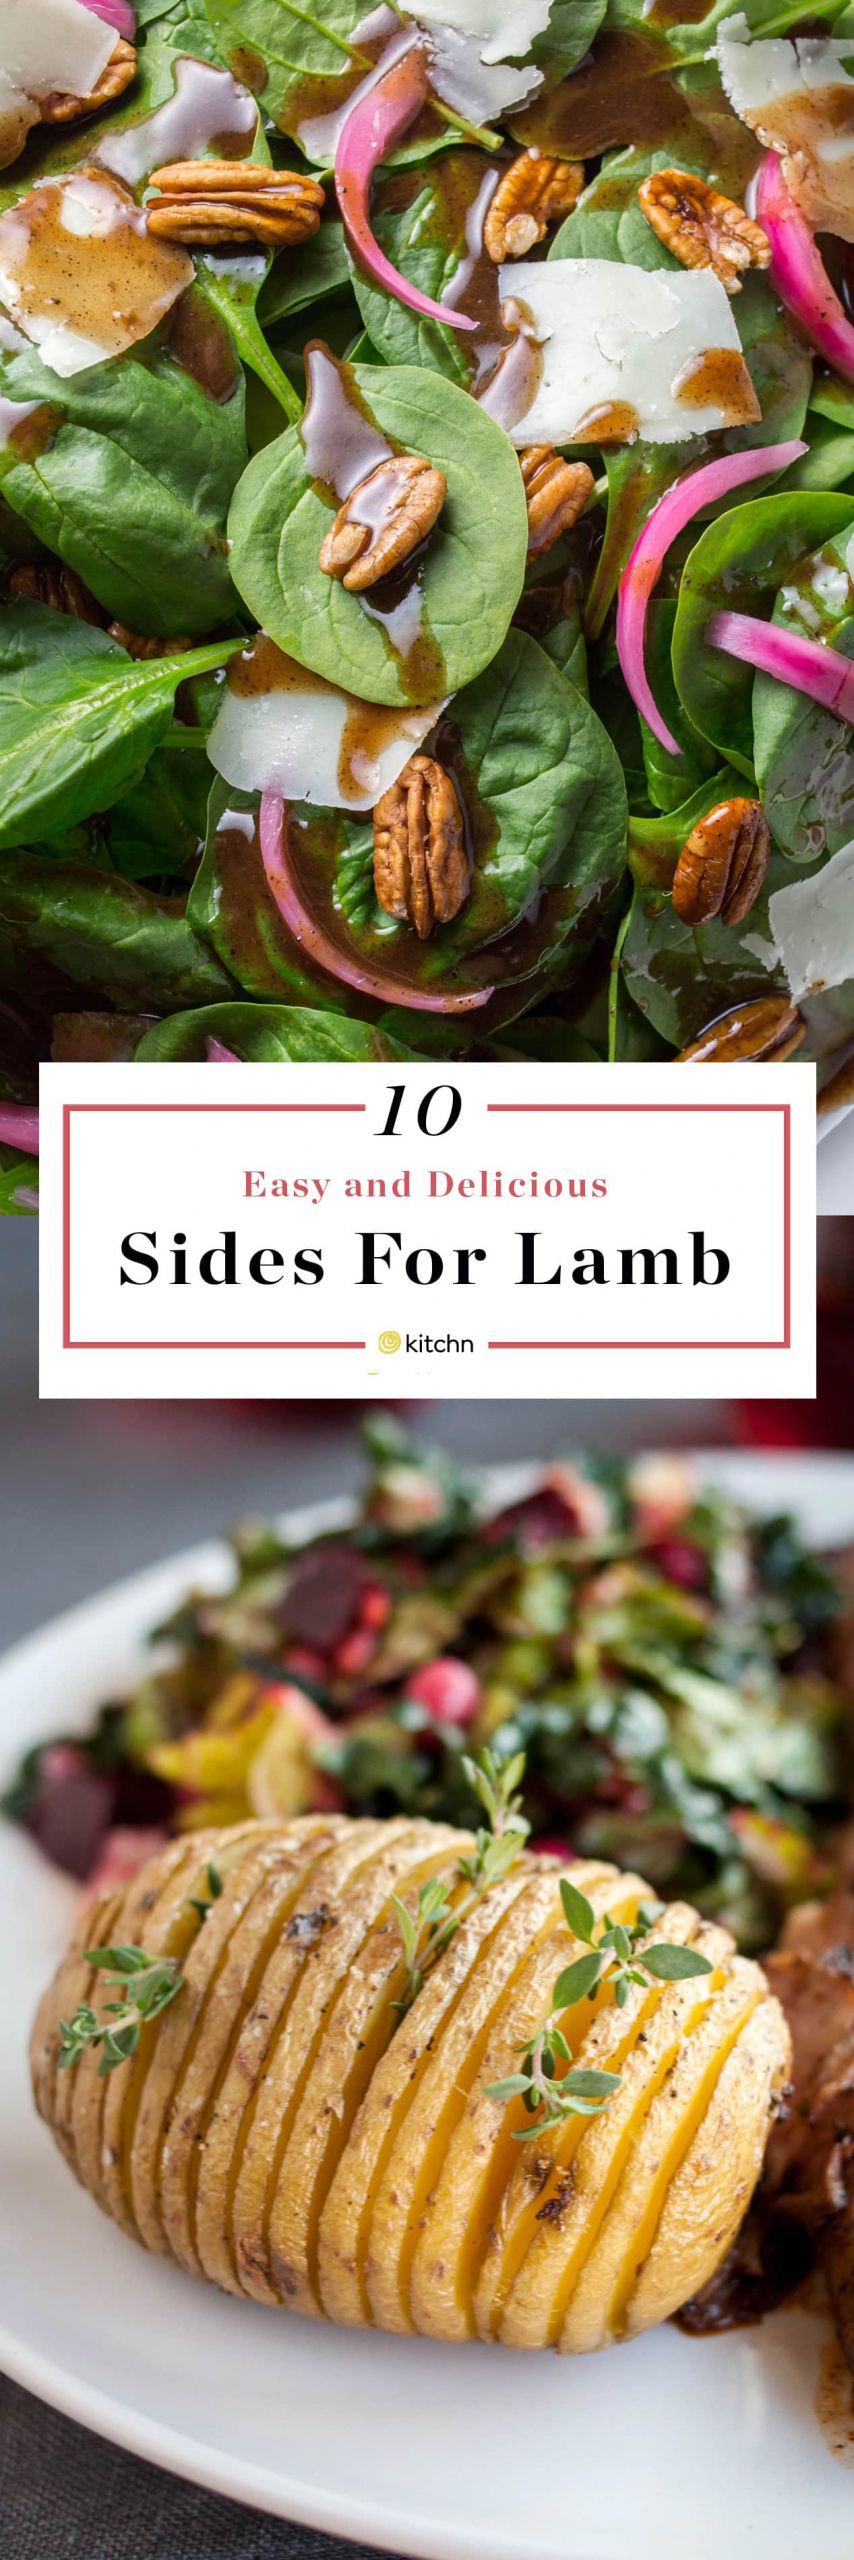 Lamb Side Dishes
 10 Side Dish Recipes That Are Perfect with Lamb